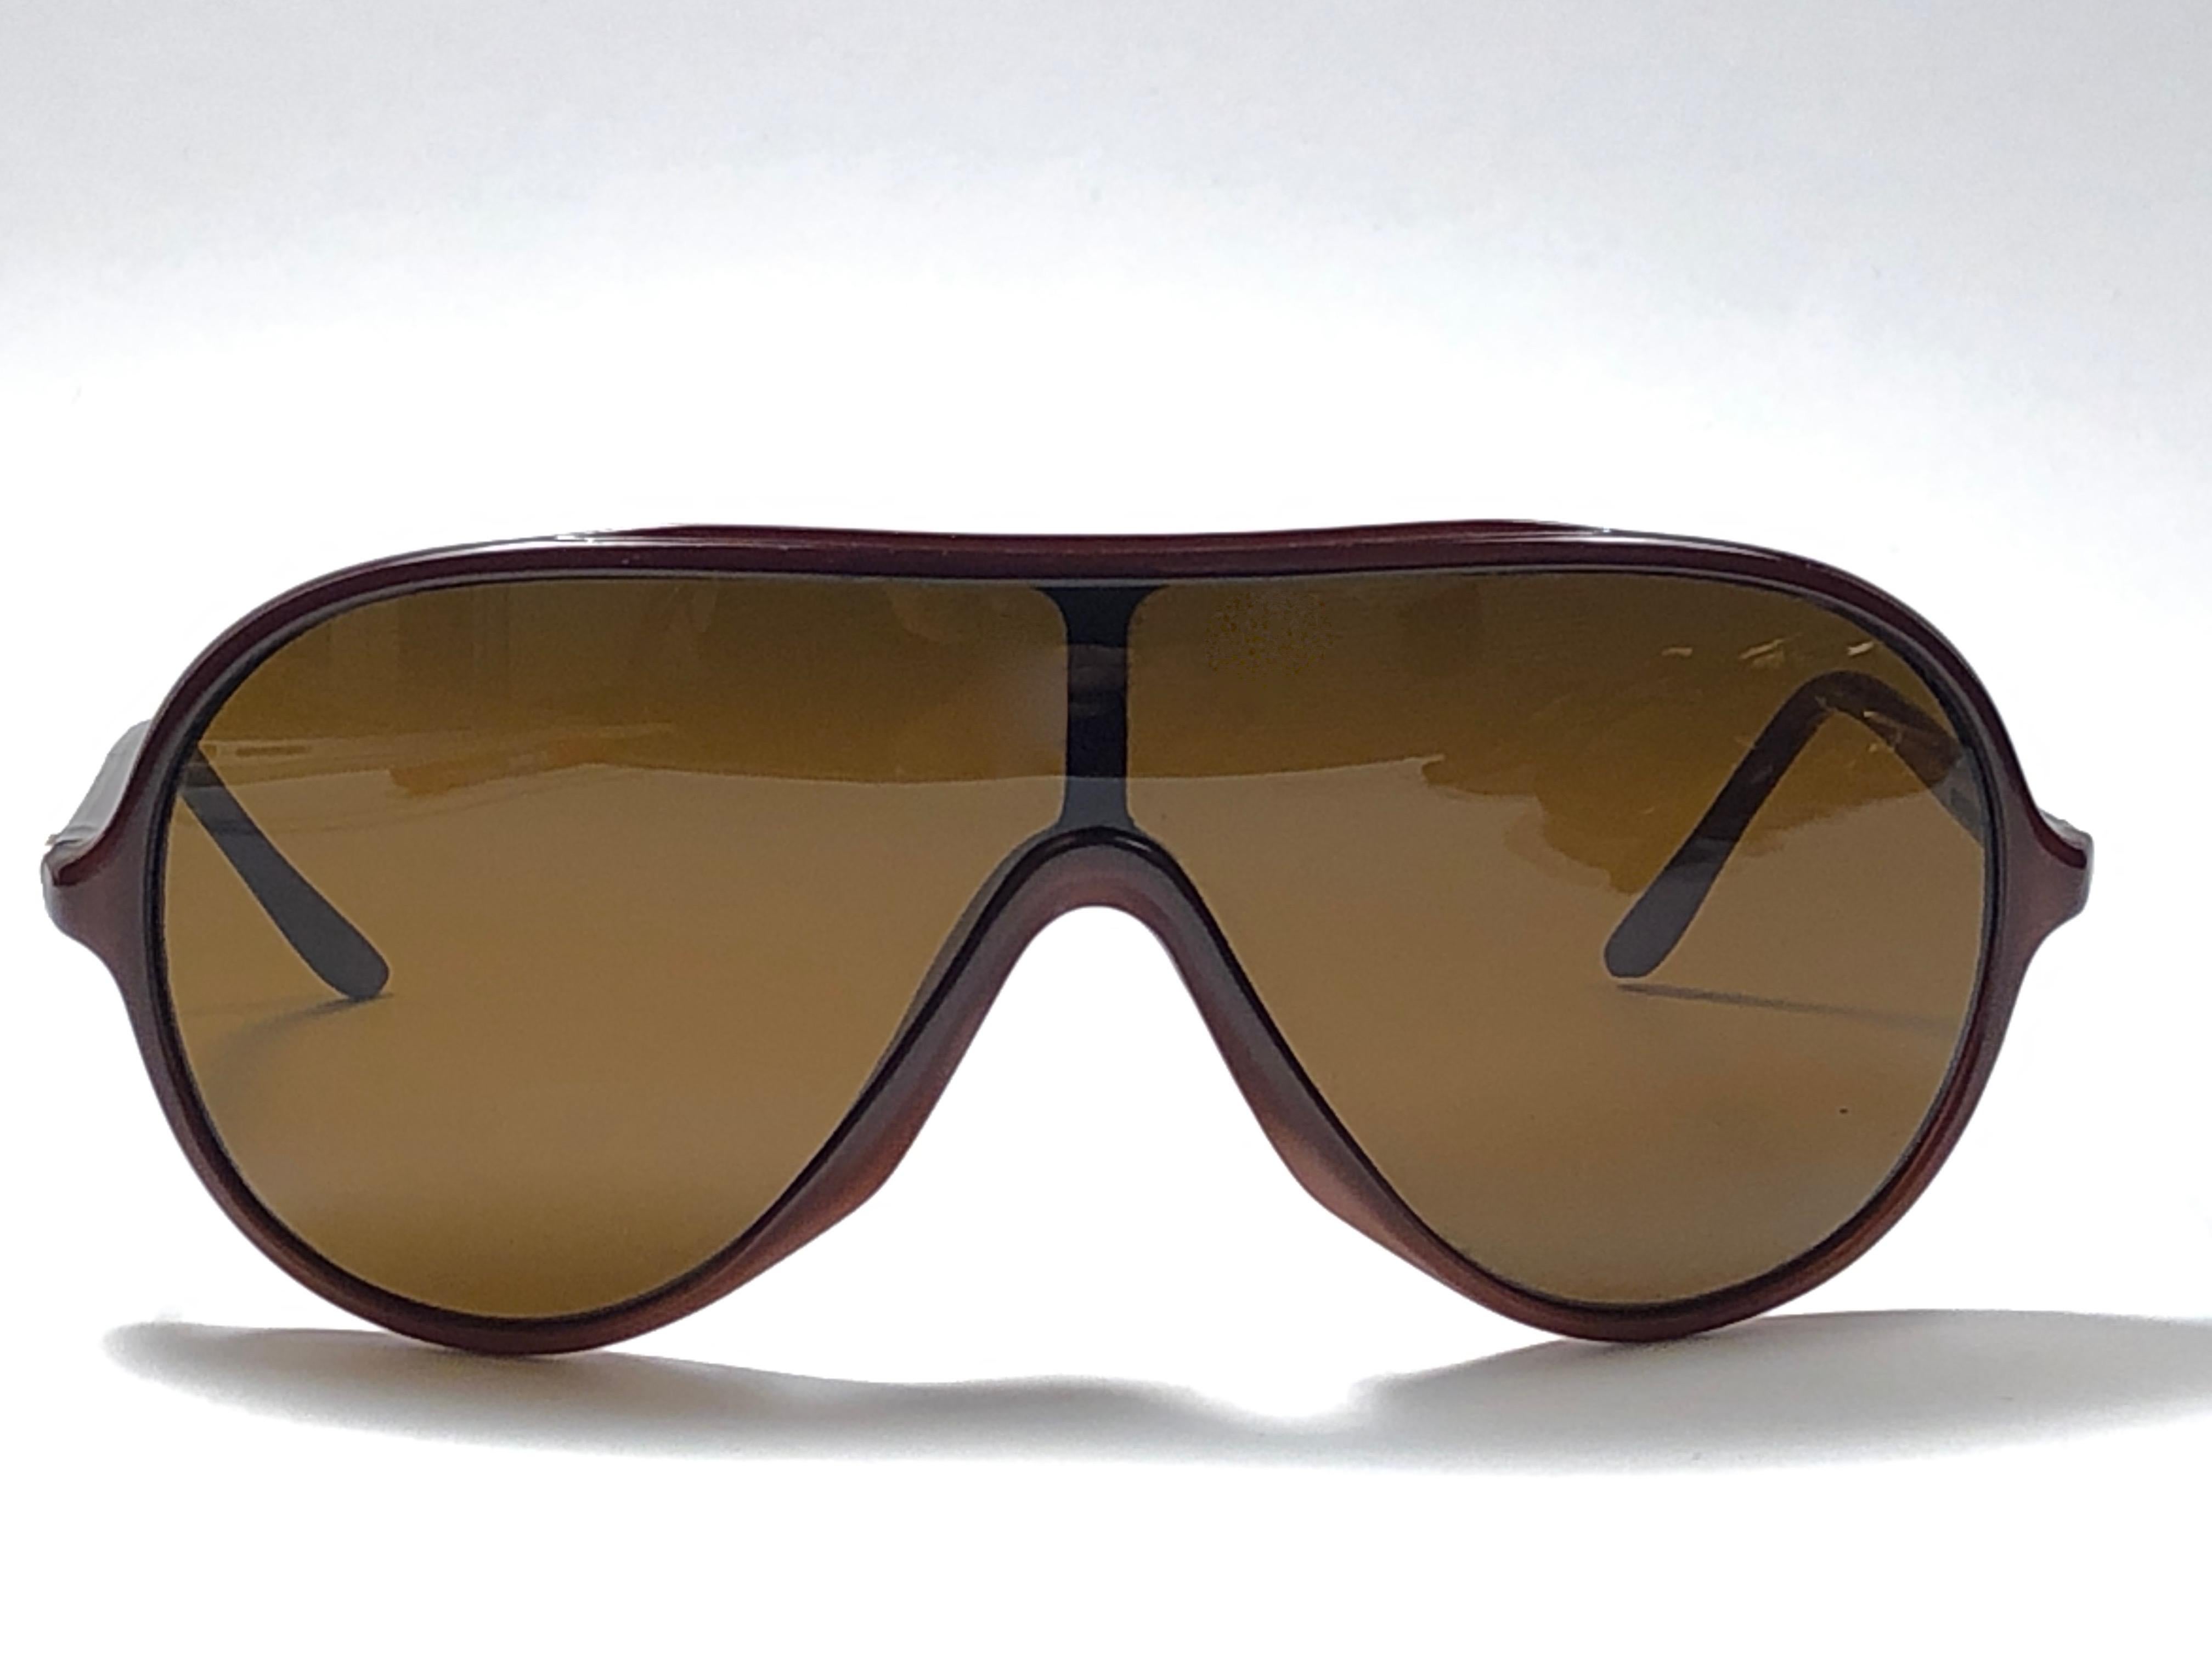 New Ray Ban Wings black with amber mono lenses.  
Please notice that this item is nearly 40 years old and could show some storage wear.  
New, ever worn or displayed.
Made in Usa.